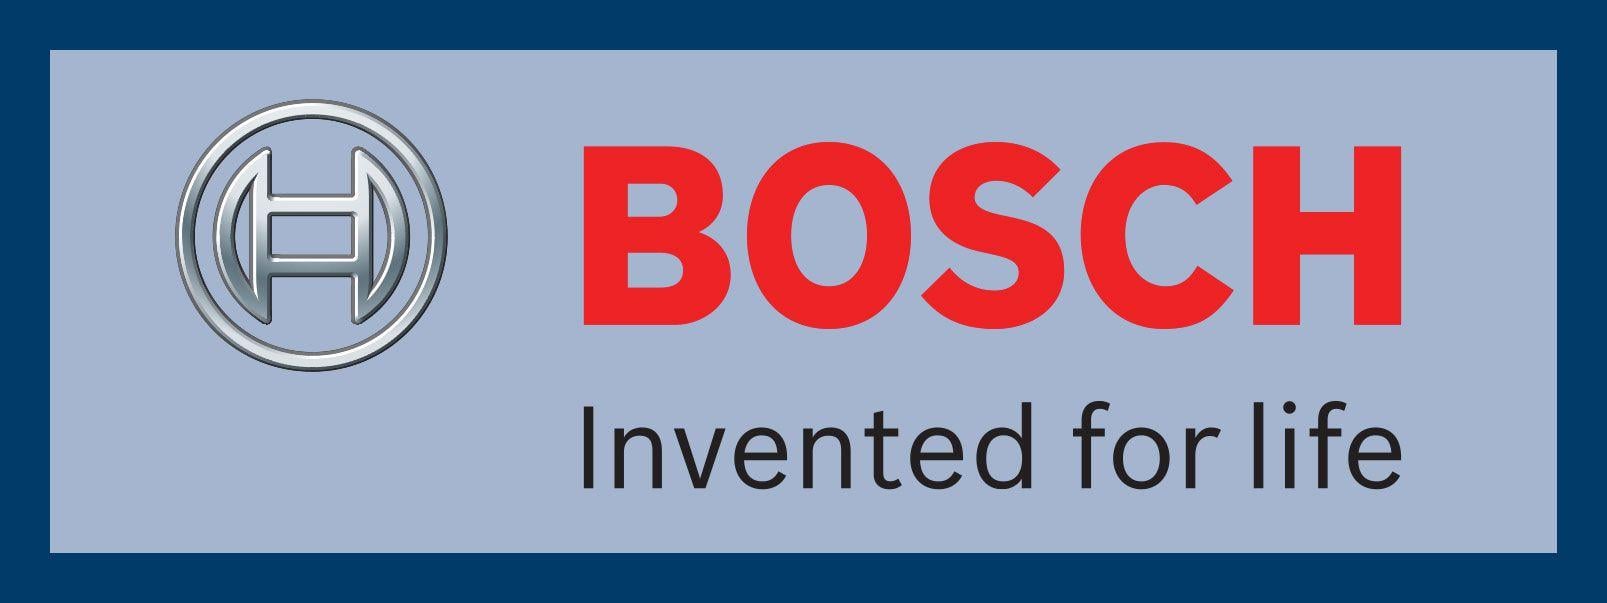 Bosch Tools Logo - Super Cheap Hardware - Products by Brand: Bosch